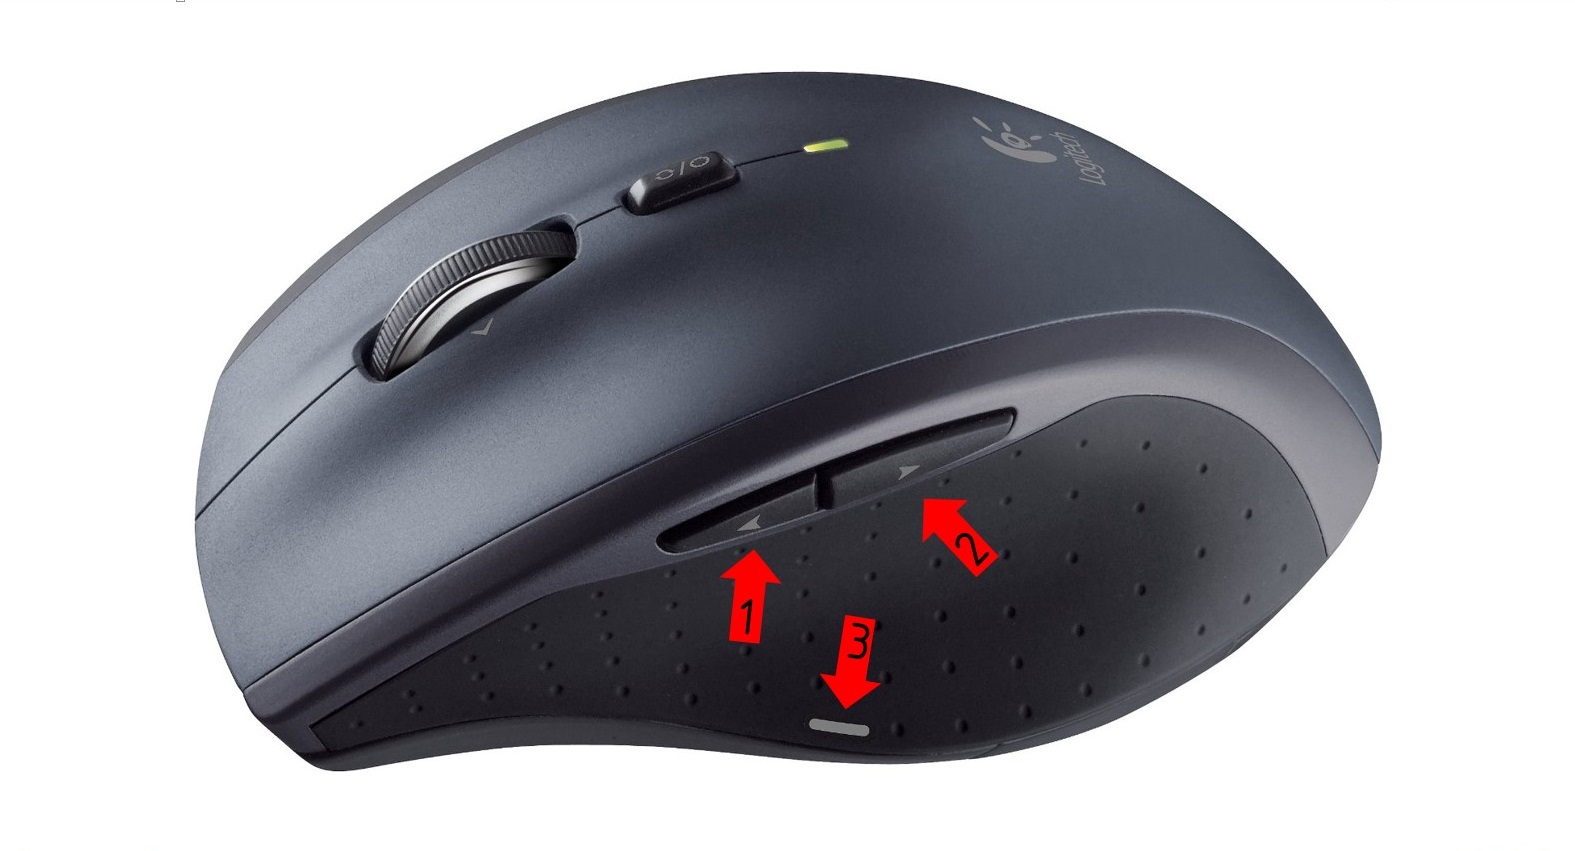 customising mouse buttons - Autodesk Community - AutoCAD